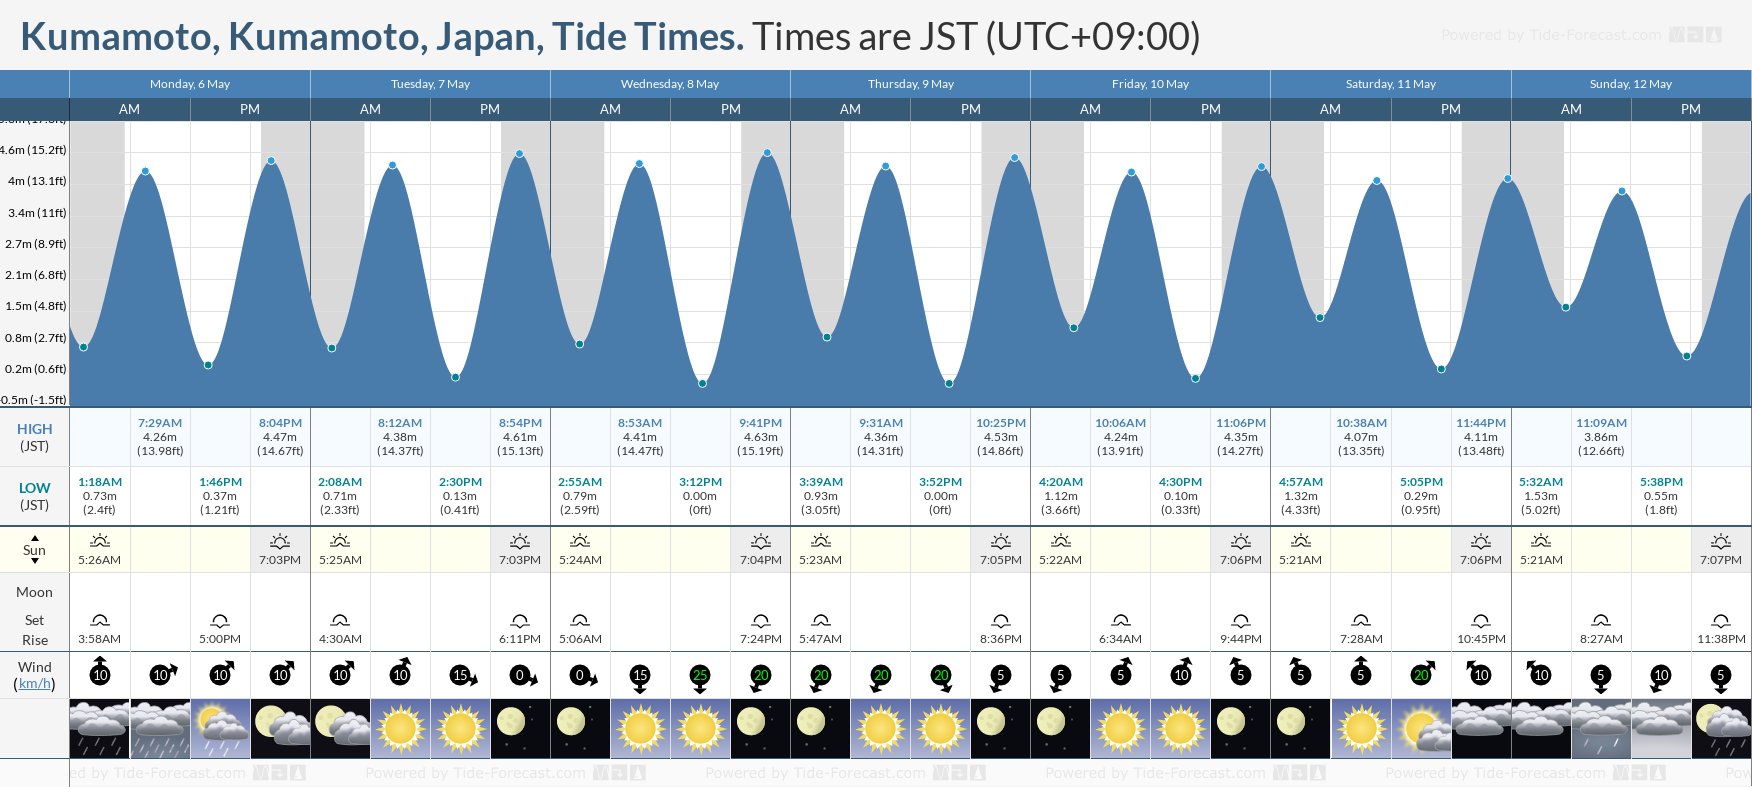 Kumamoto, Kumamoto, Japan Tide Chart including high and low tide times for the next 7 days